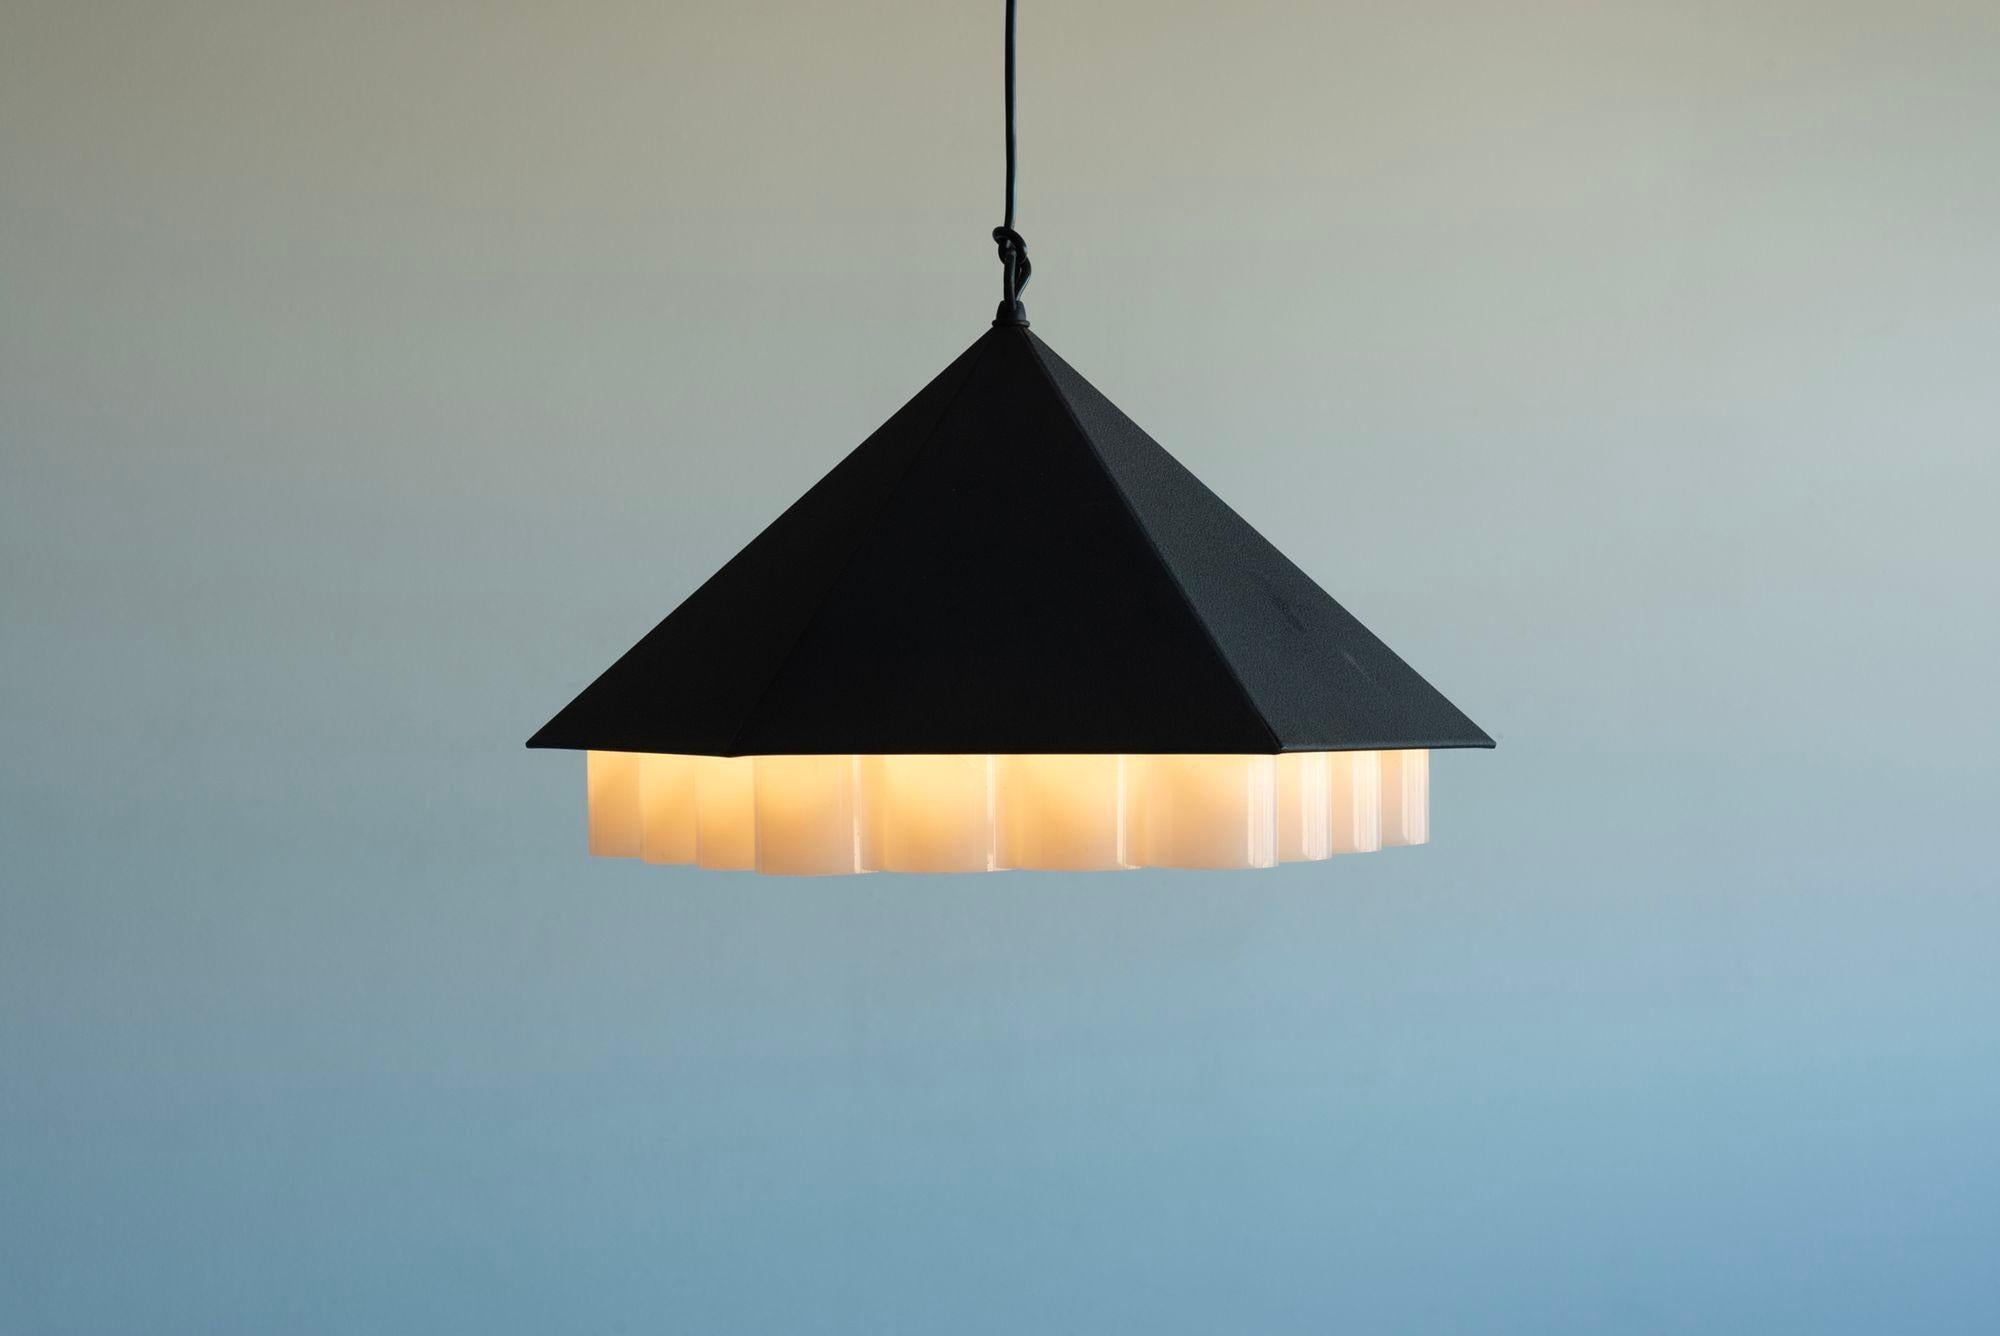 George Nelson & Associates Beehive Pendant Lamp: Designed by Lucia DeRespinis (1960) for George Nelson's office for Nessen Studio, Textured enameled metal hexagonal shaped pyramid with Honeycomb light diffuser.
Long 6' heavy cord that can be